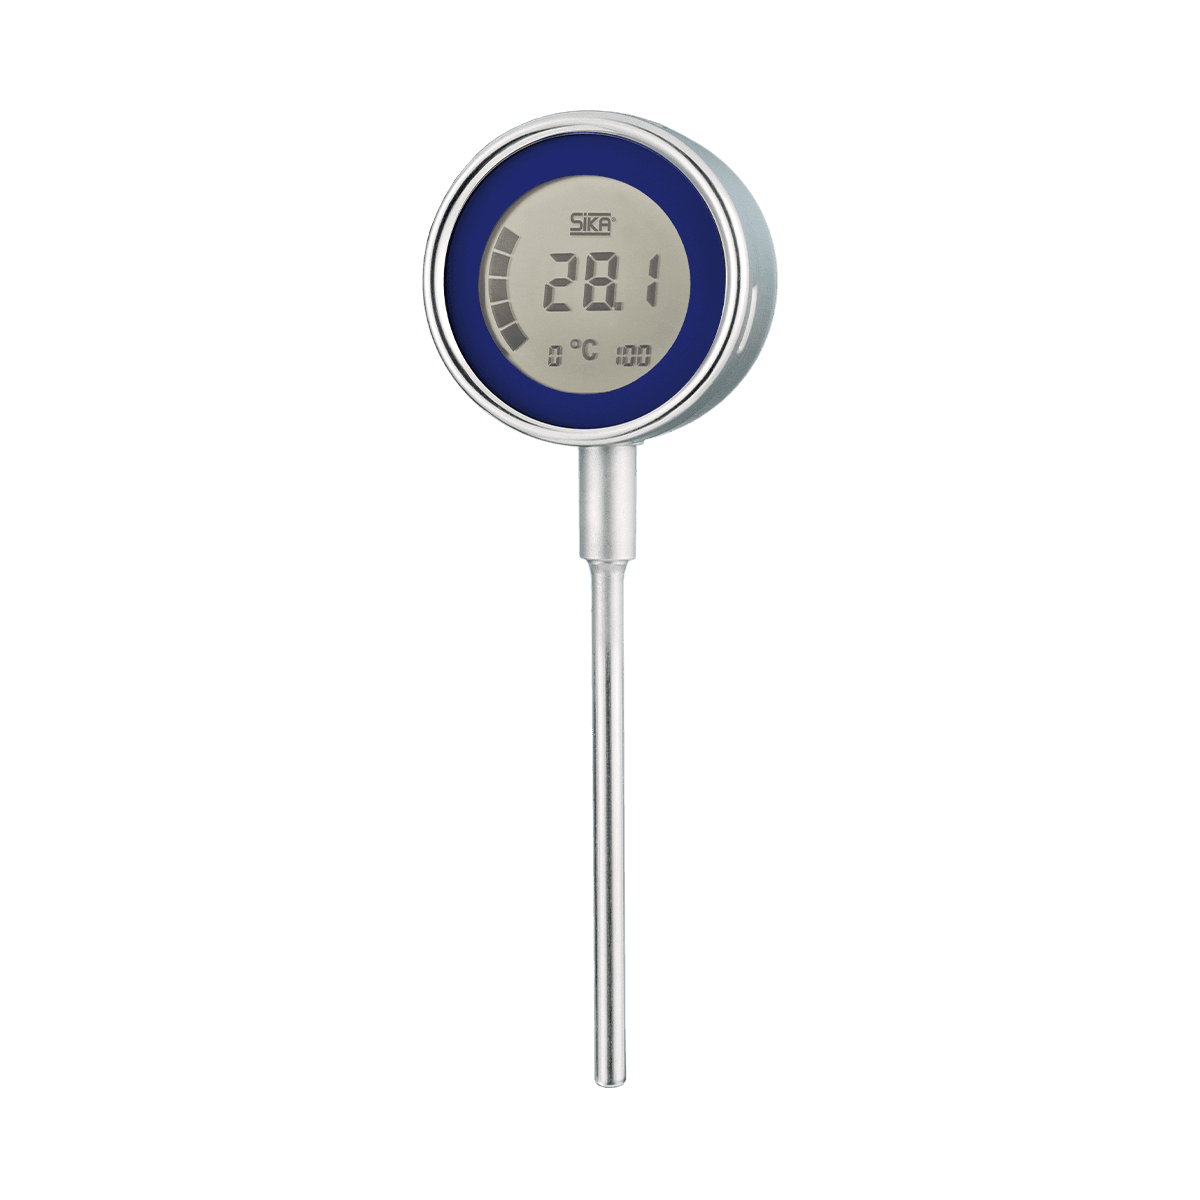 Digital thermometer » Industry and shipbuilding